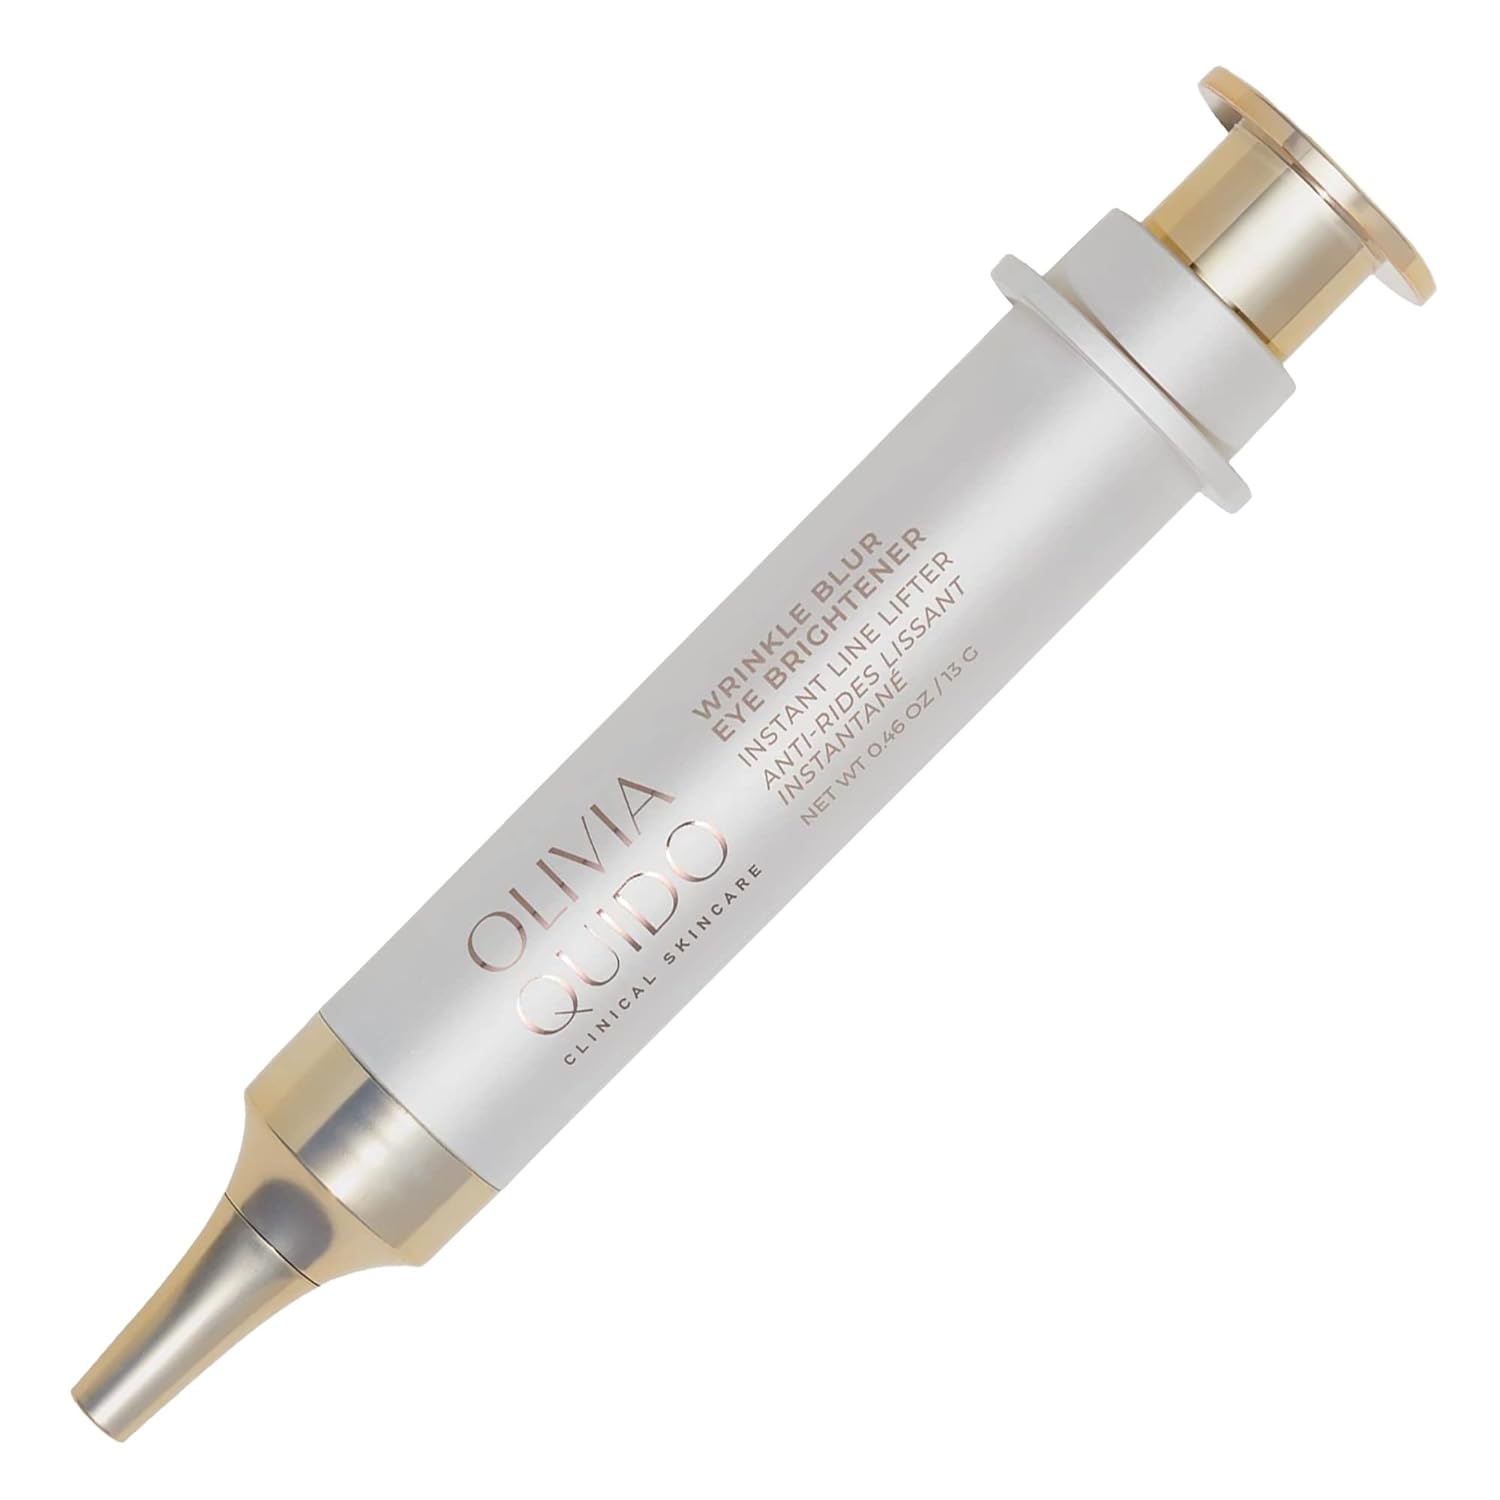 OLIVIA QUIDO Clinical Skin Care Wrinkle Blur (0.46 ) | Eye Cream For Dark Circles and Puffiness | Anti-Aging Under Eye Cream | Hydrating, Brightening, and Dark Circles Under Eye Treatment for Women